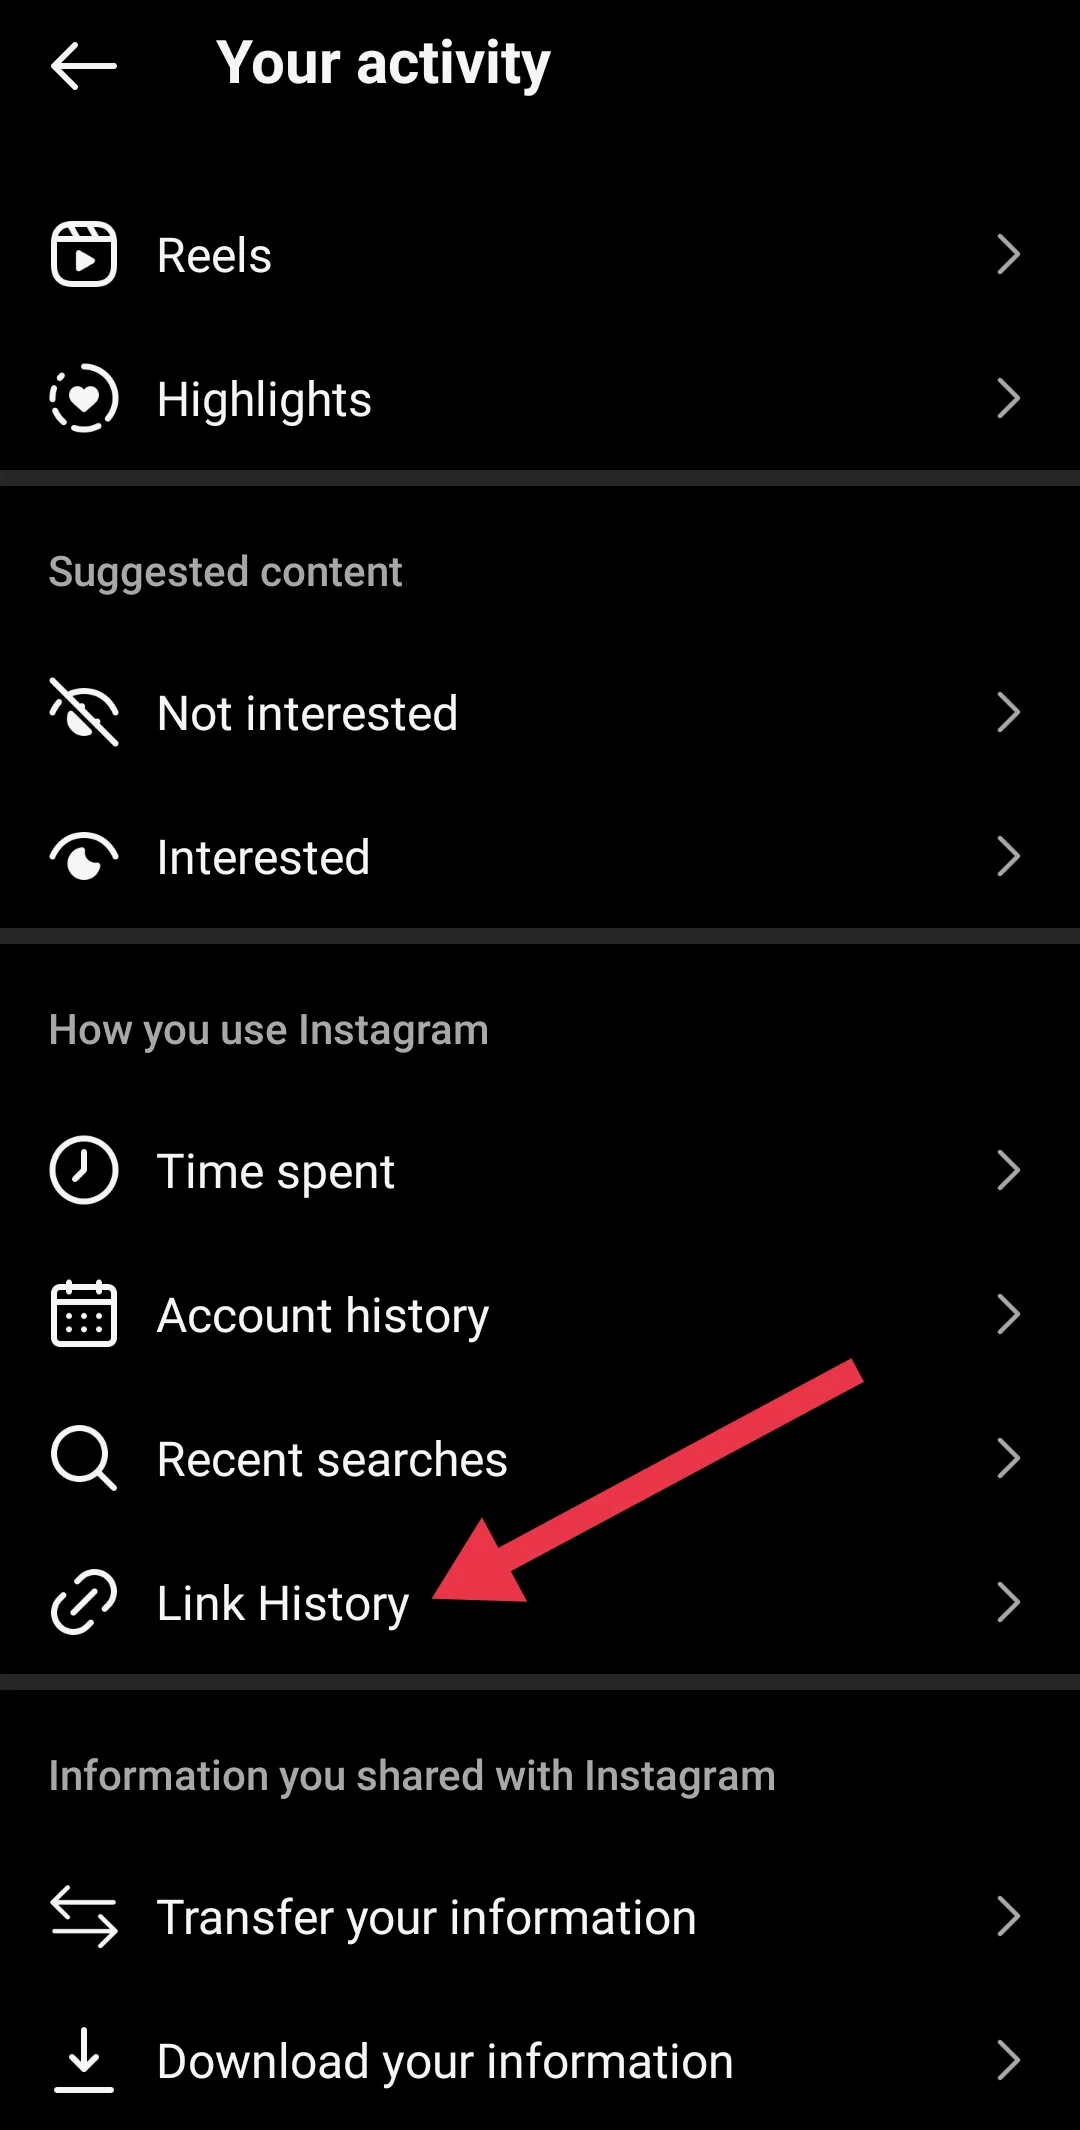 Instagram link history option under your activity